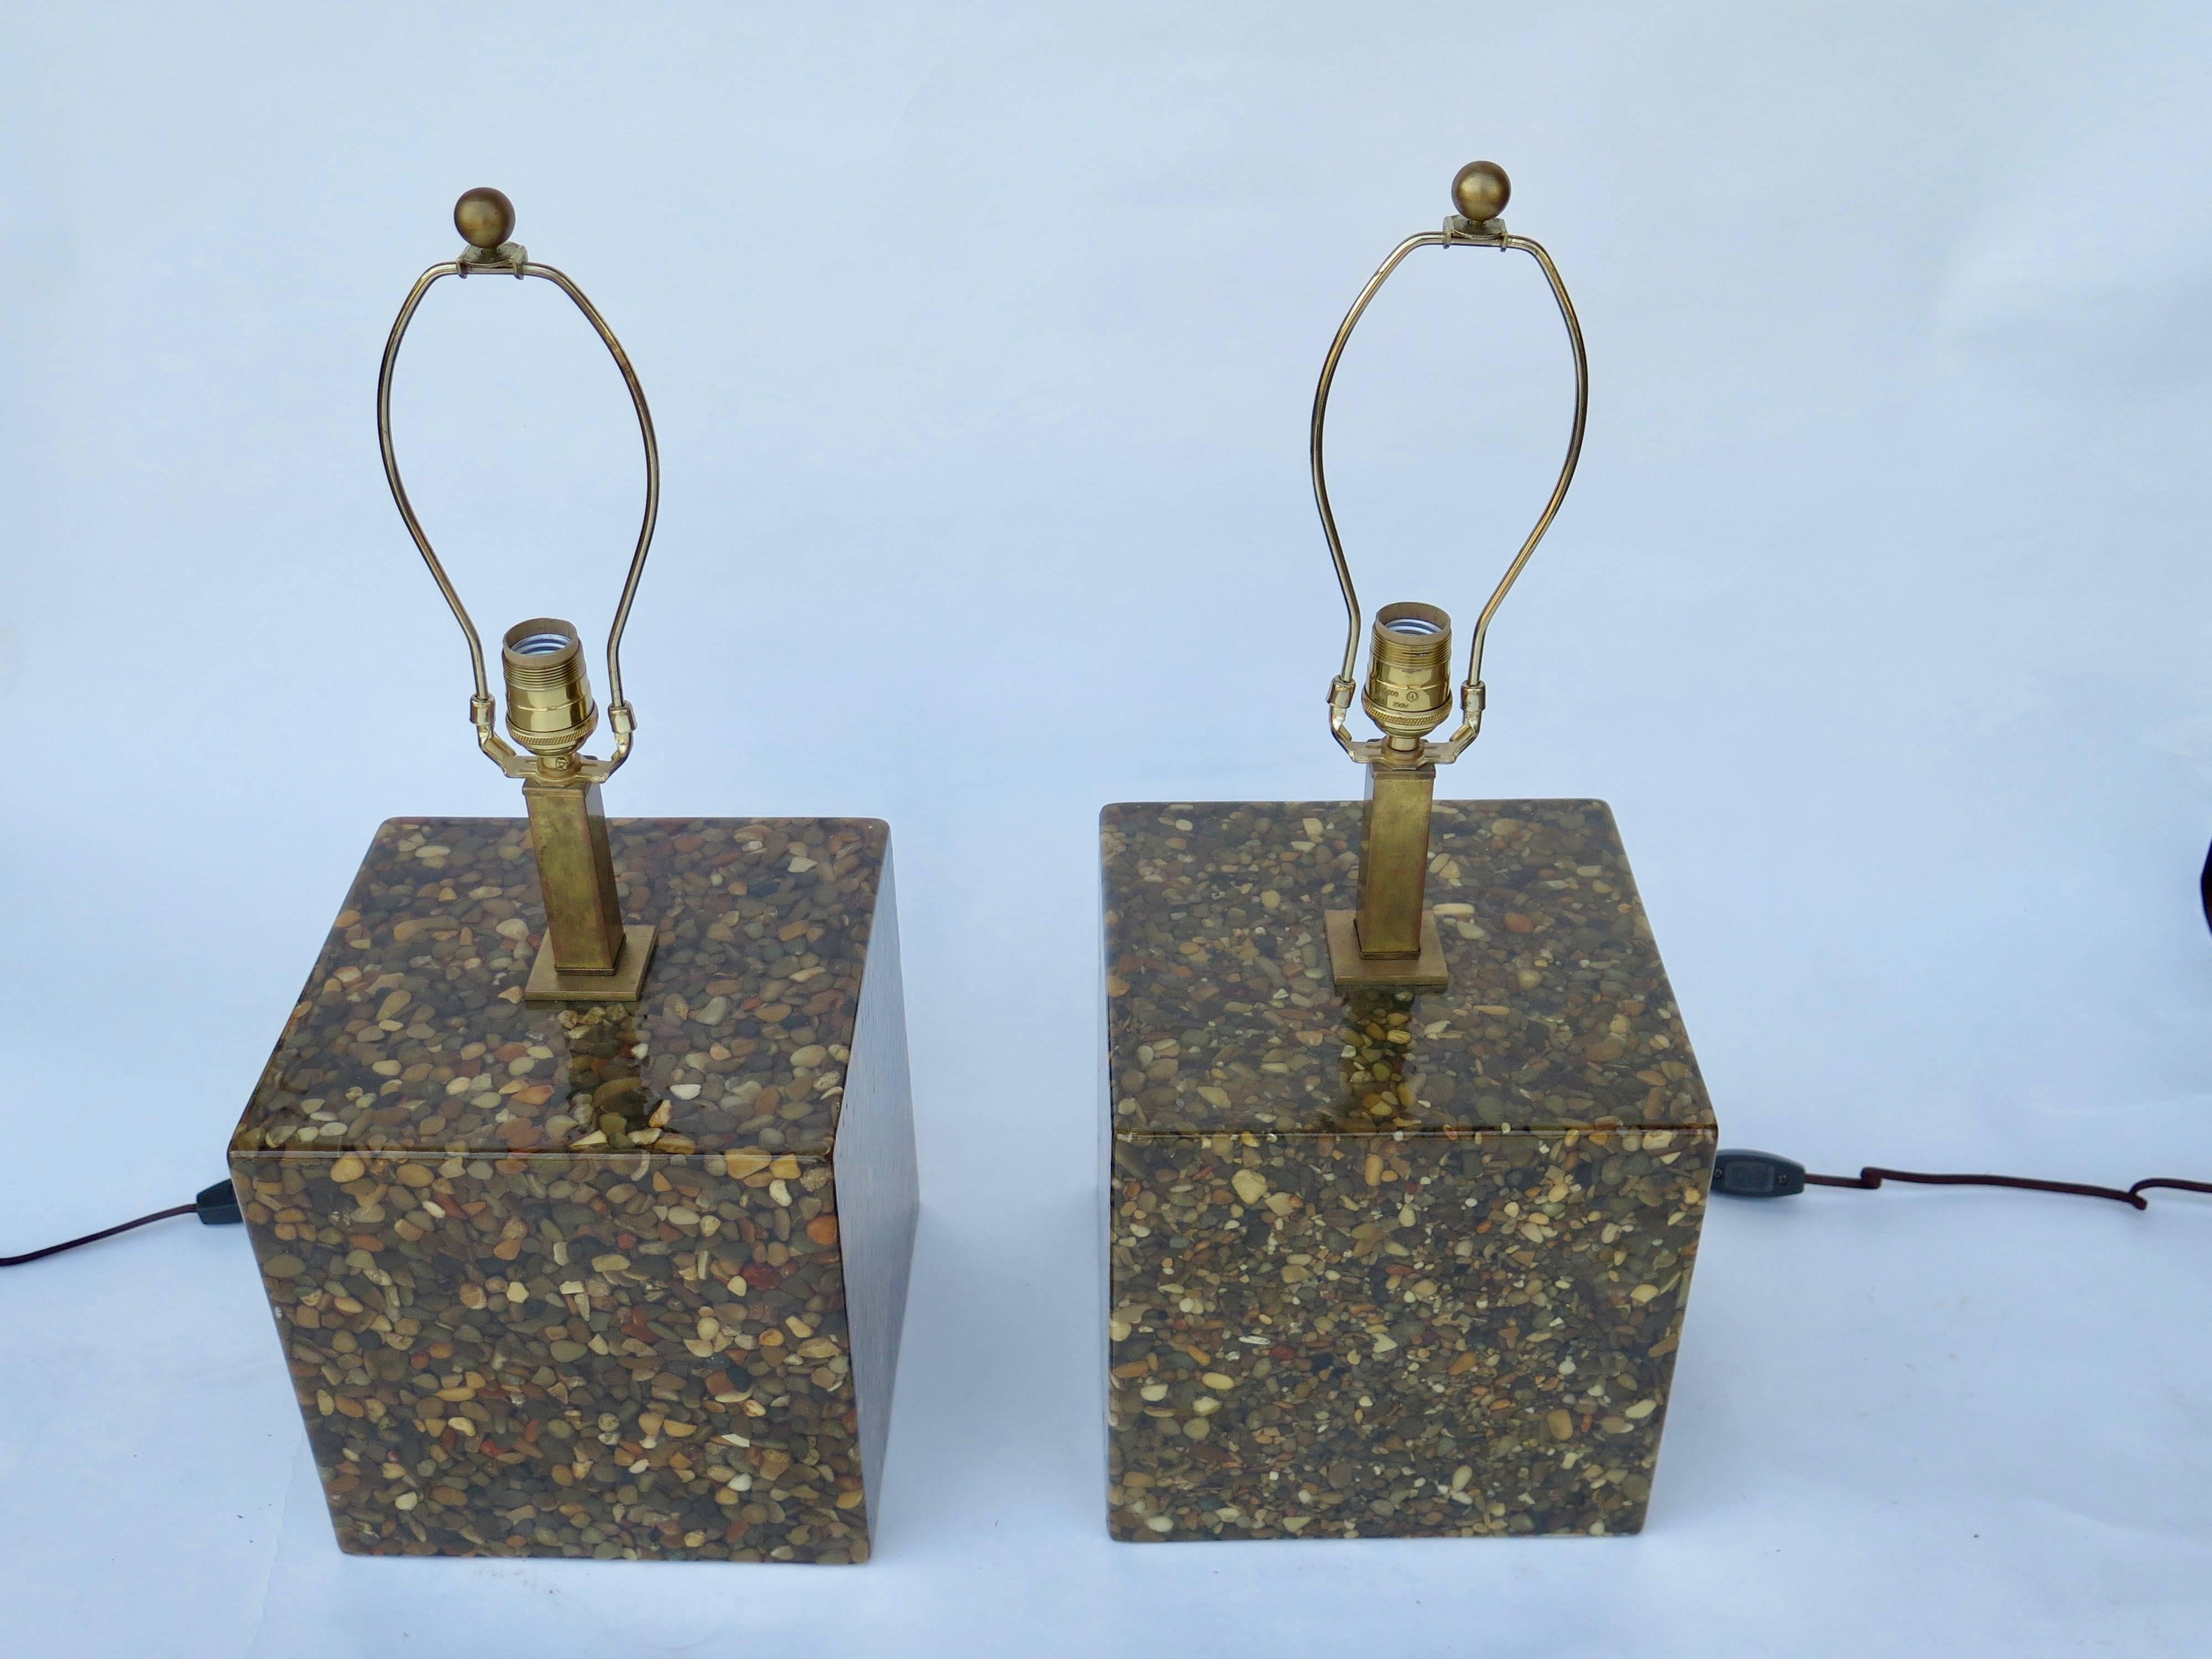 Pair of lamps with pebbles in epoxy. Brass hardware. Haskell Antiques. 